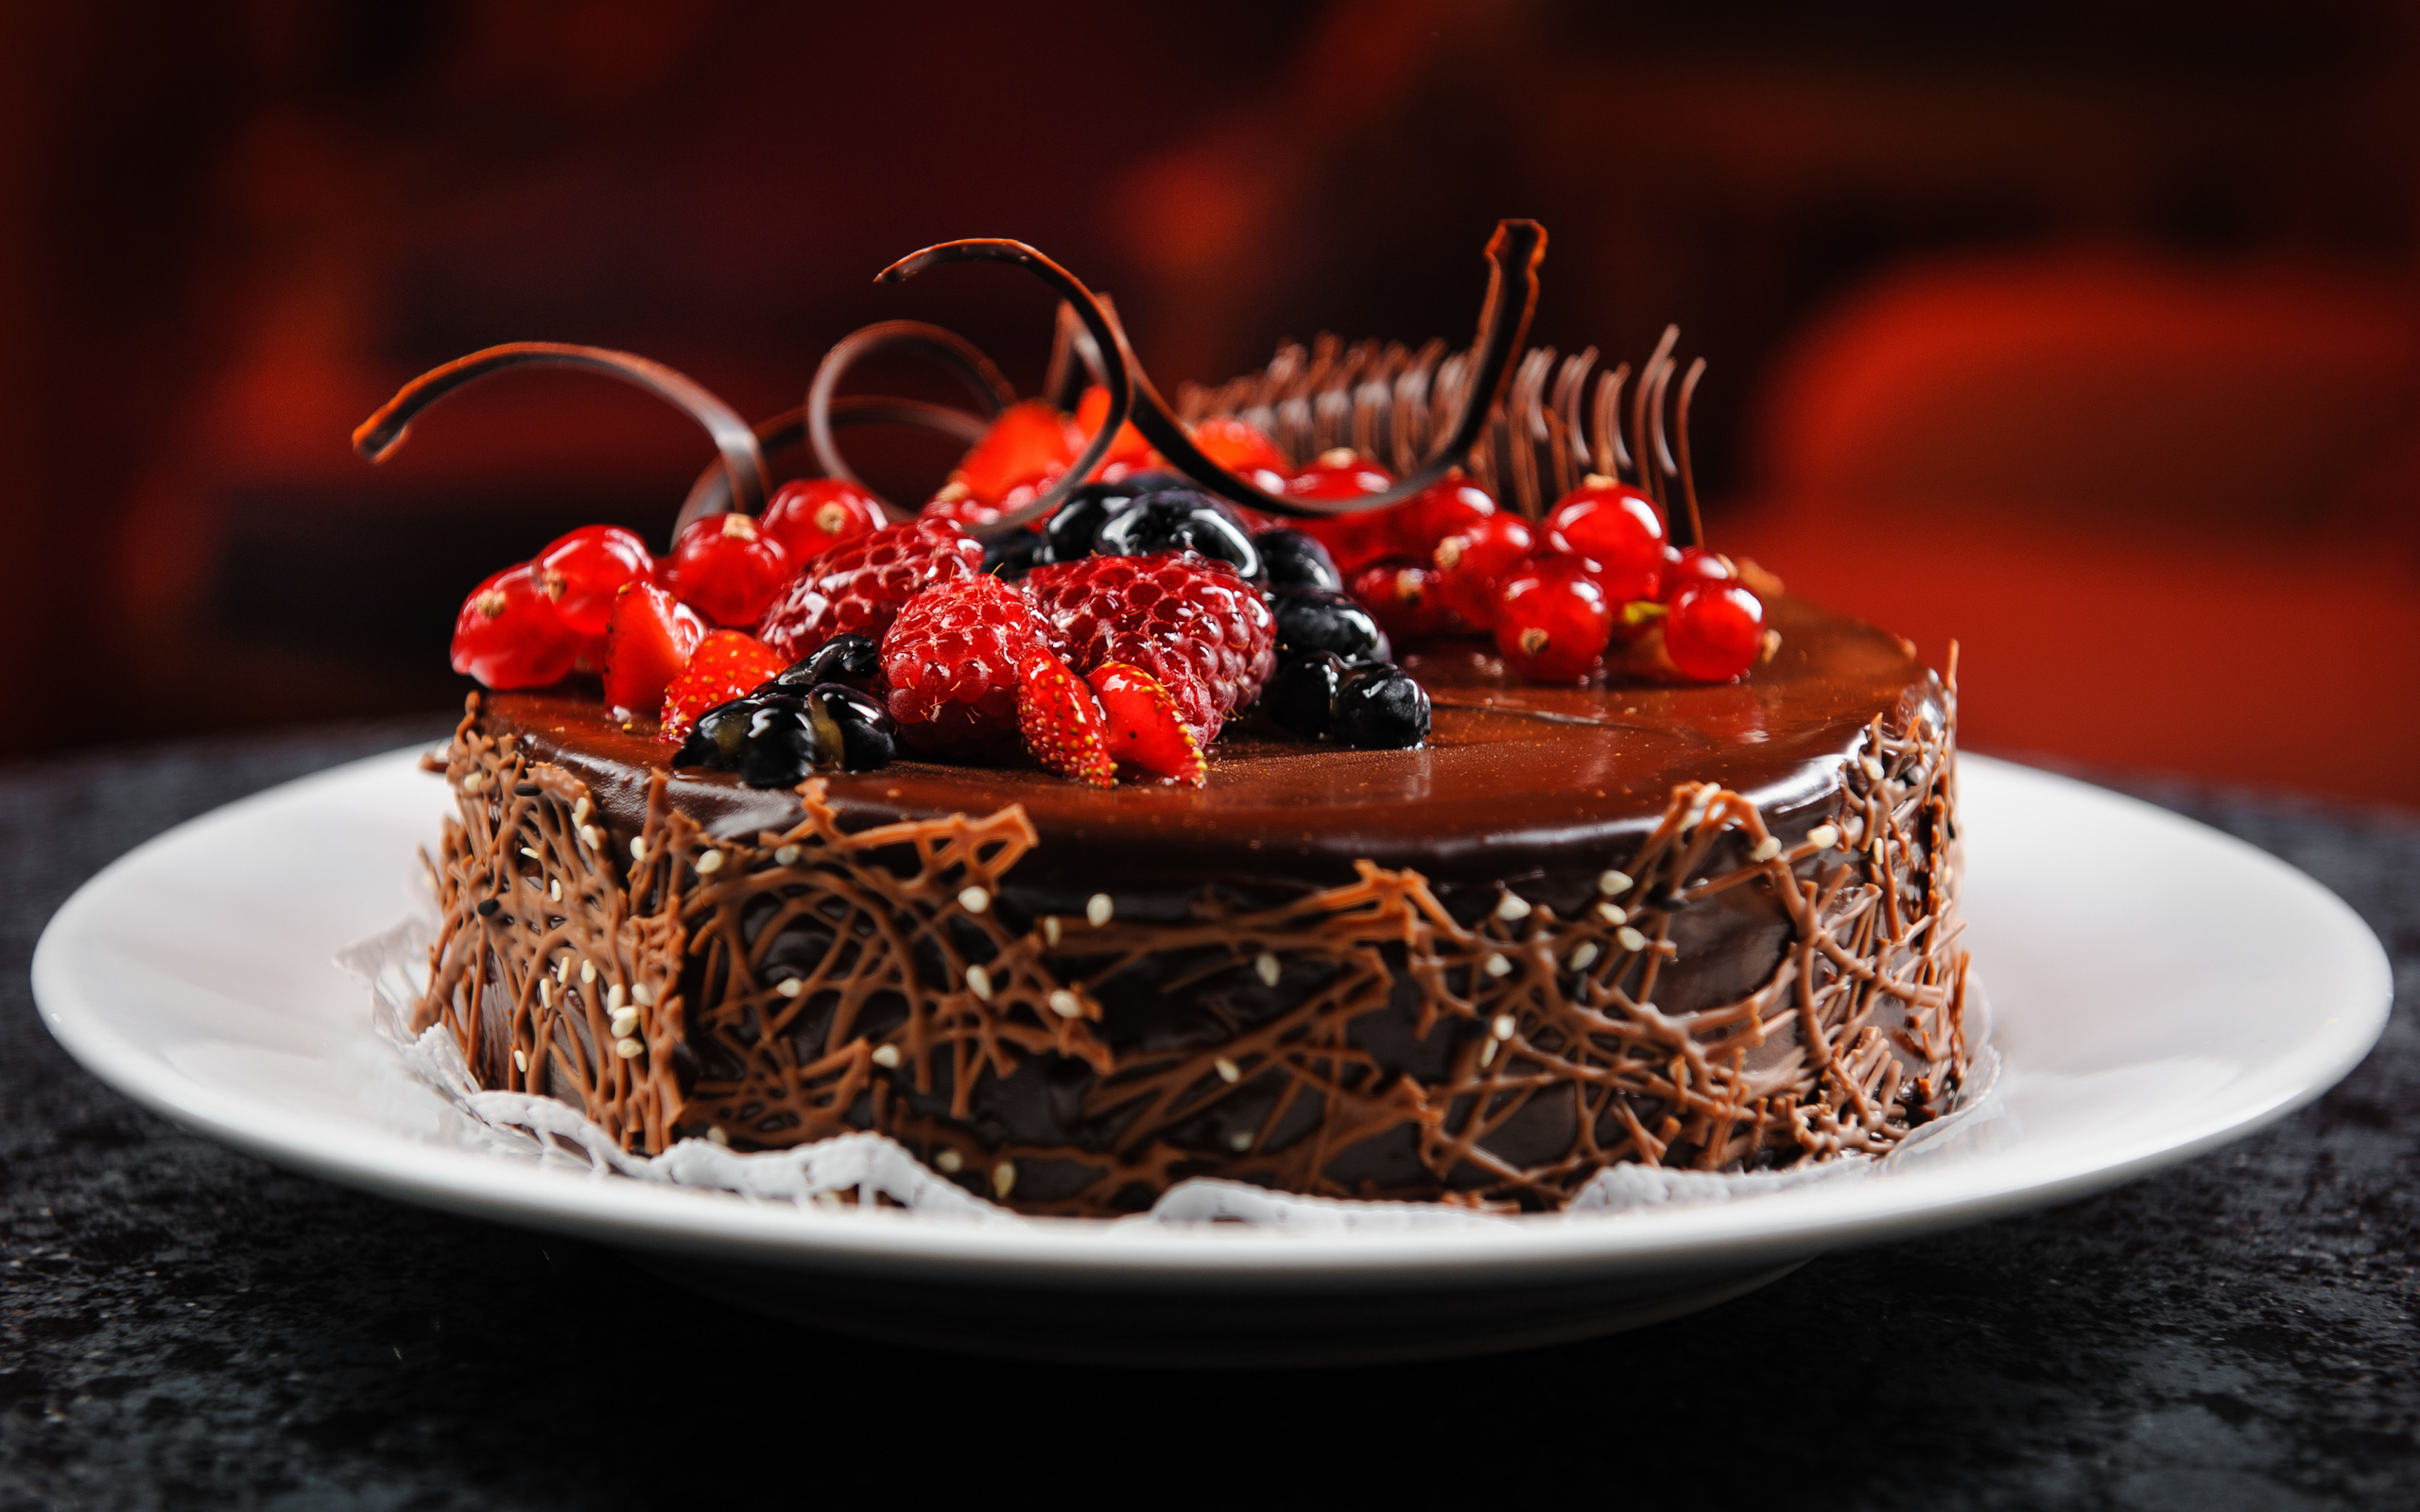 Cake: Packed with candied fruits, nuts, and spices, soaked in alcohol for enhanced flavor. 2560x1600 HD Background.